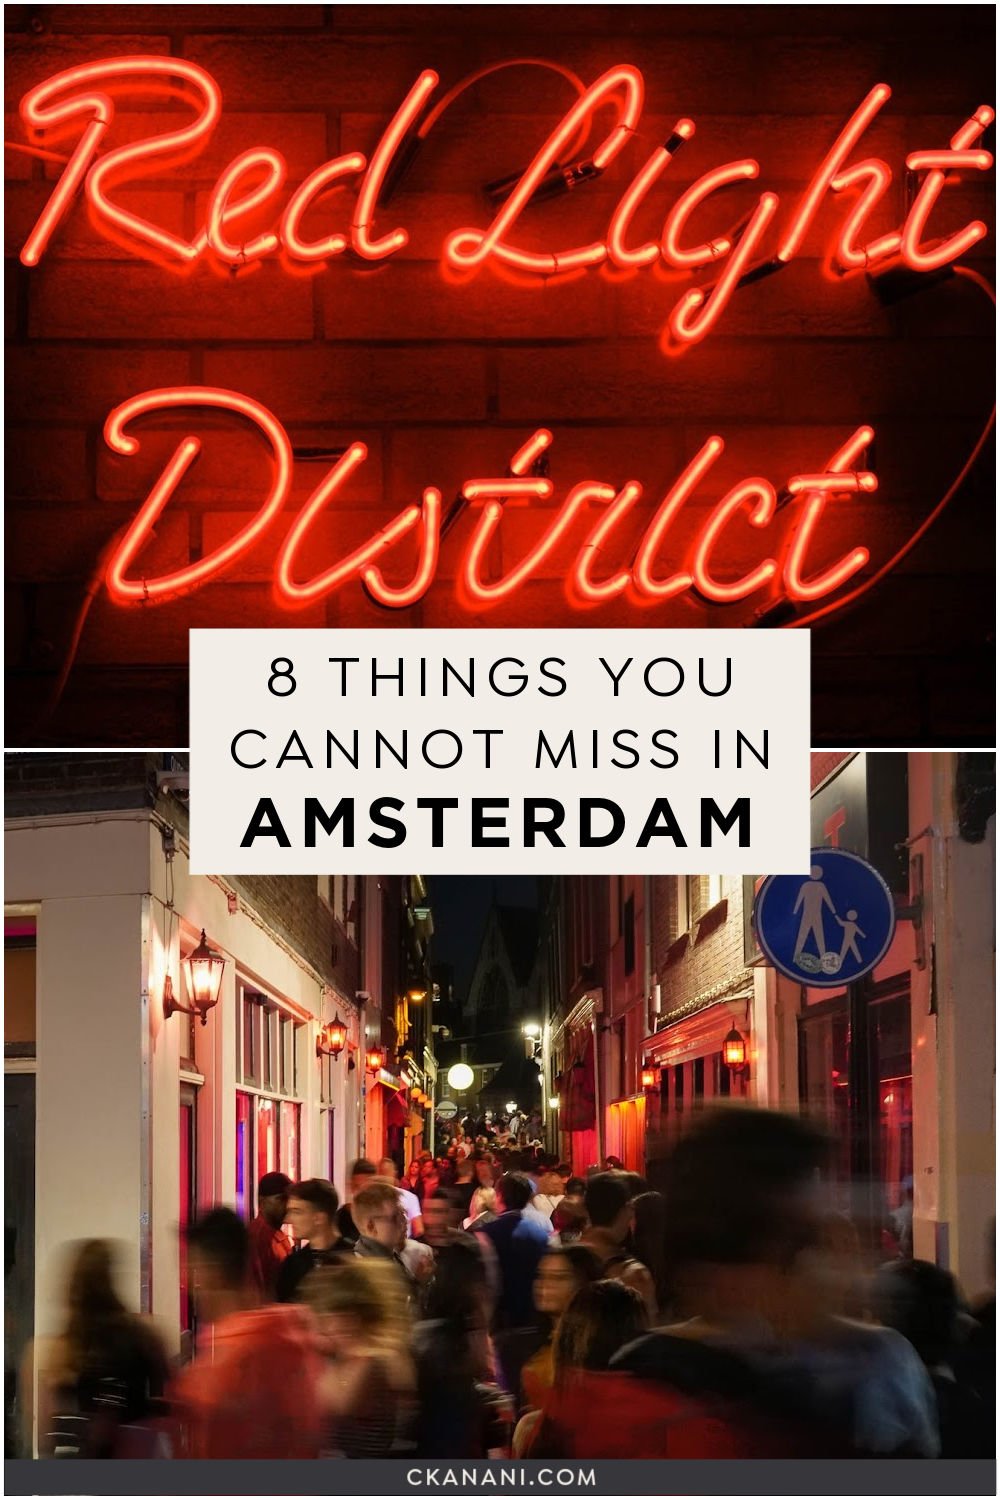 8 things you cannot miss in Amsterdam! 3 days in Amsterdam itinerary. Amsterdam travel tips, Amsterdam visit, Amsterdam itinerary, the Netherlands itinerary, Europe trip, Europe travel